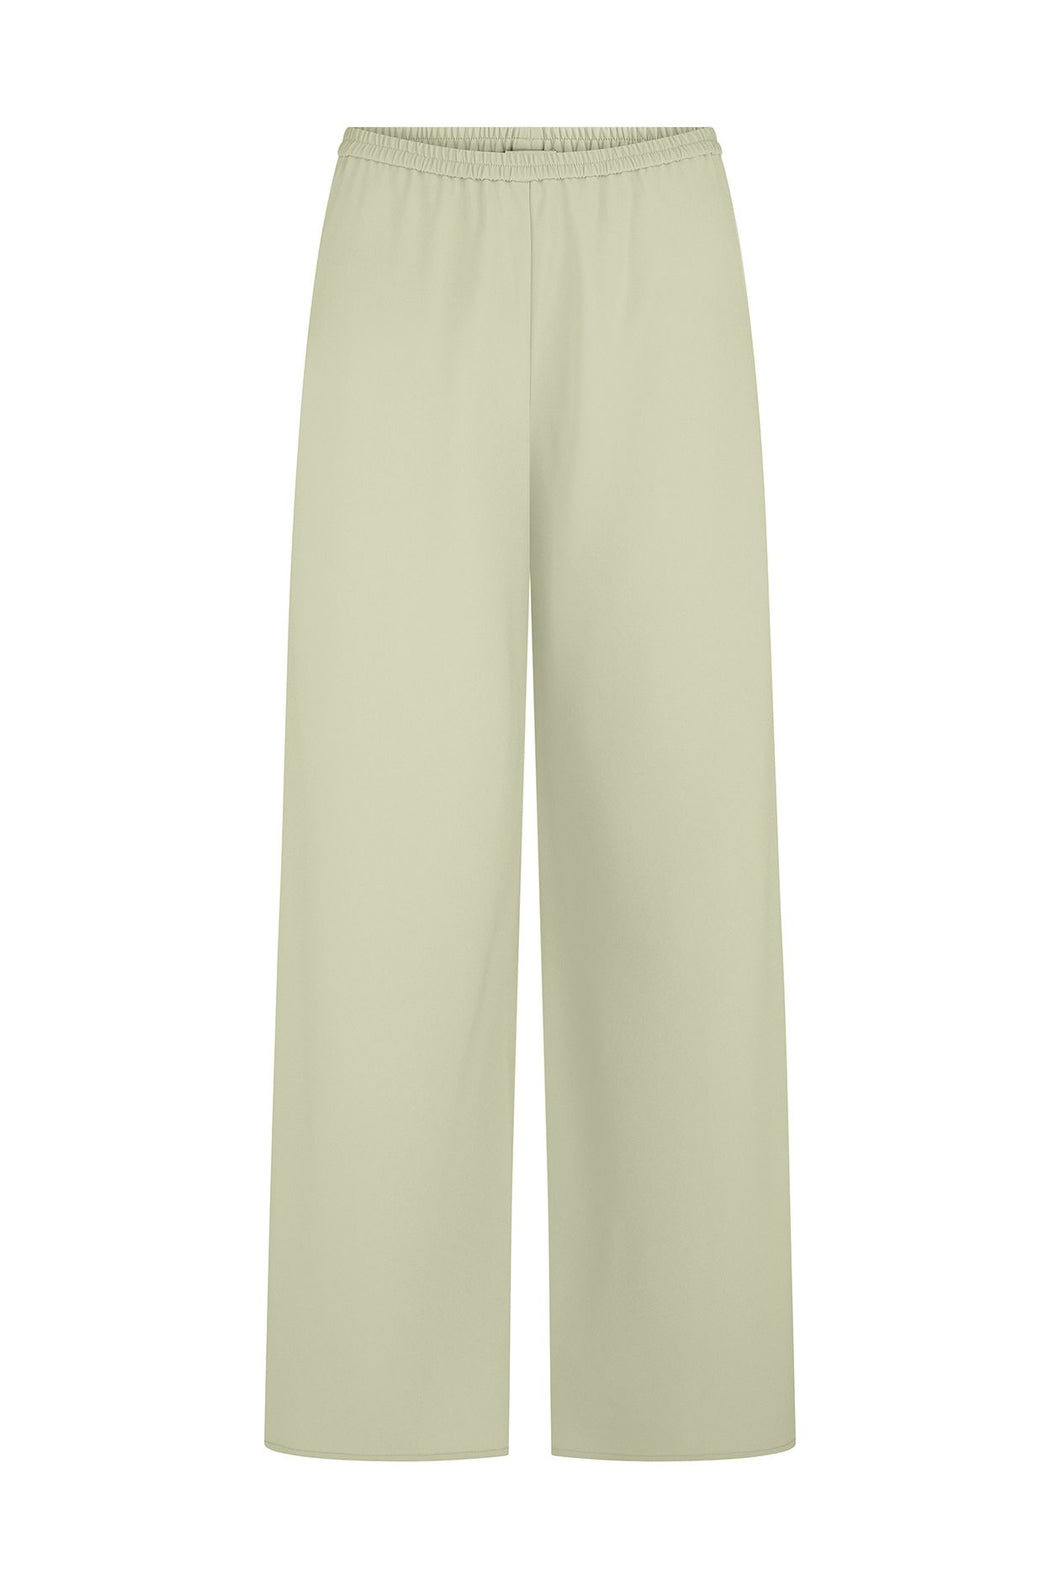 Harris Tapper Irving Trouser - Moss Green Suiting Pants Hyde Boutique   